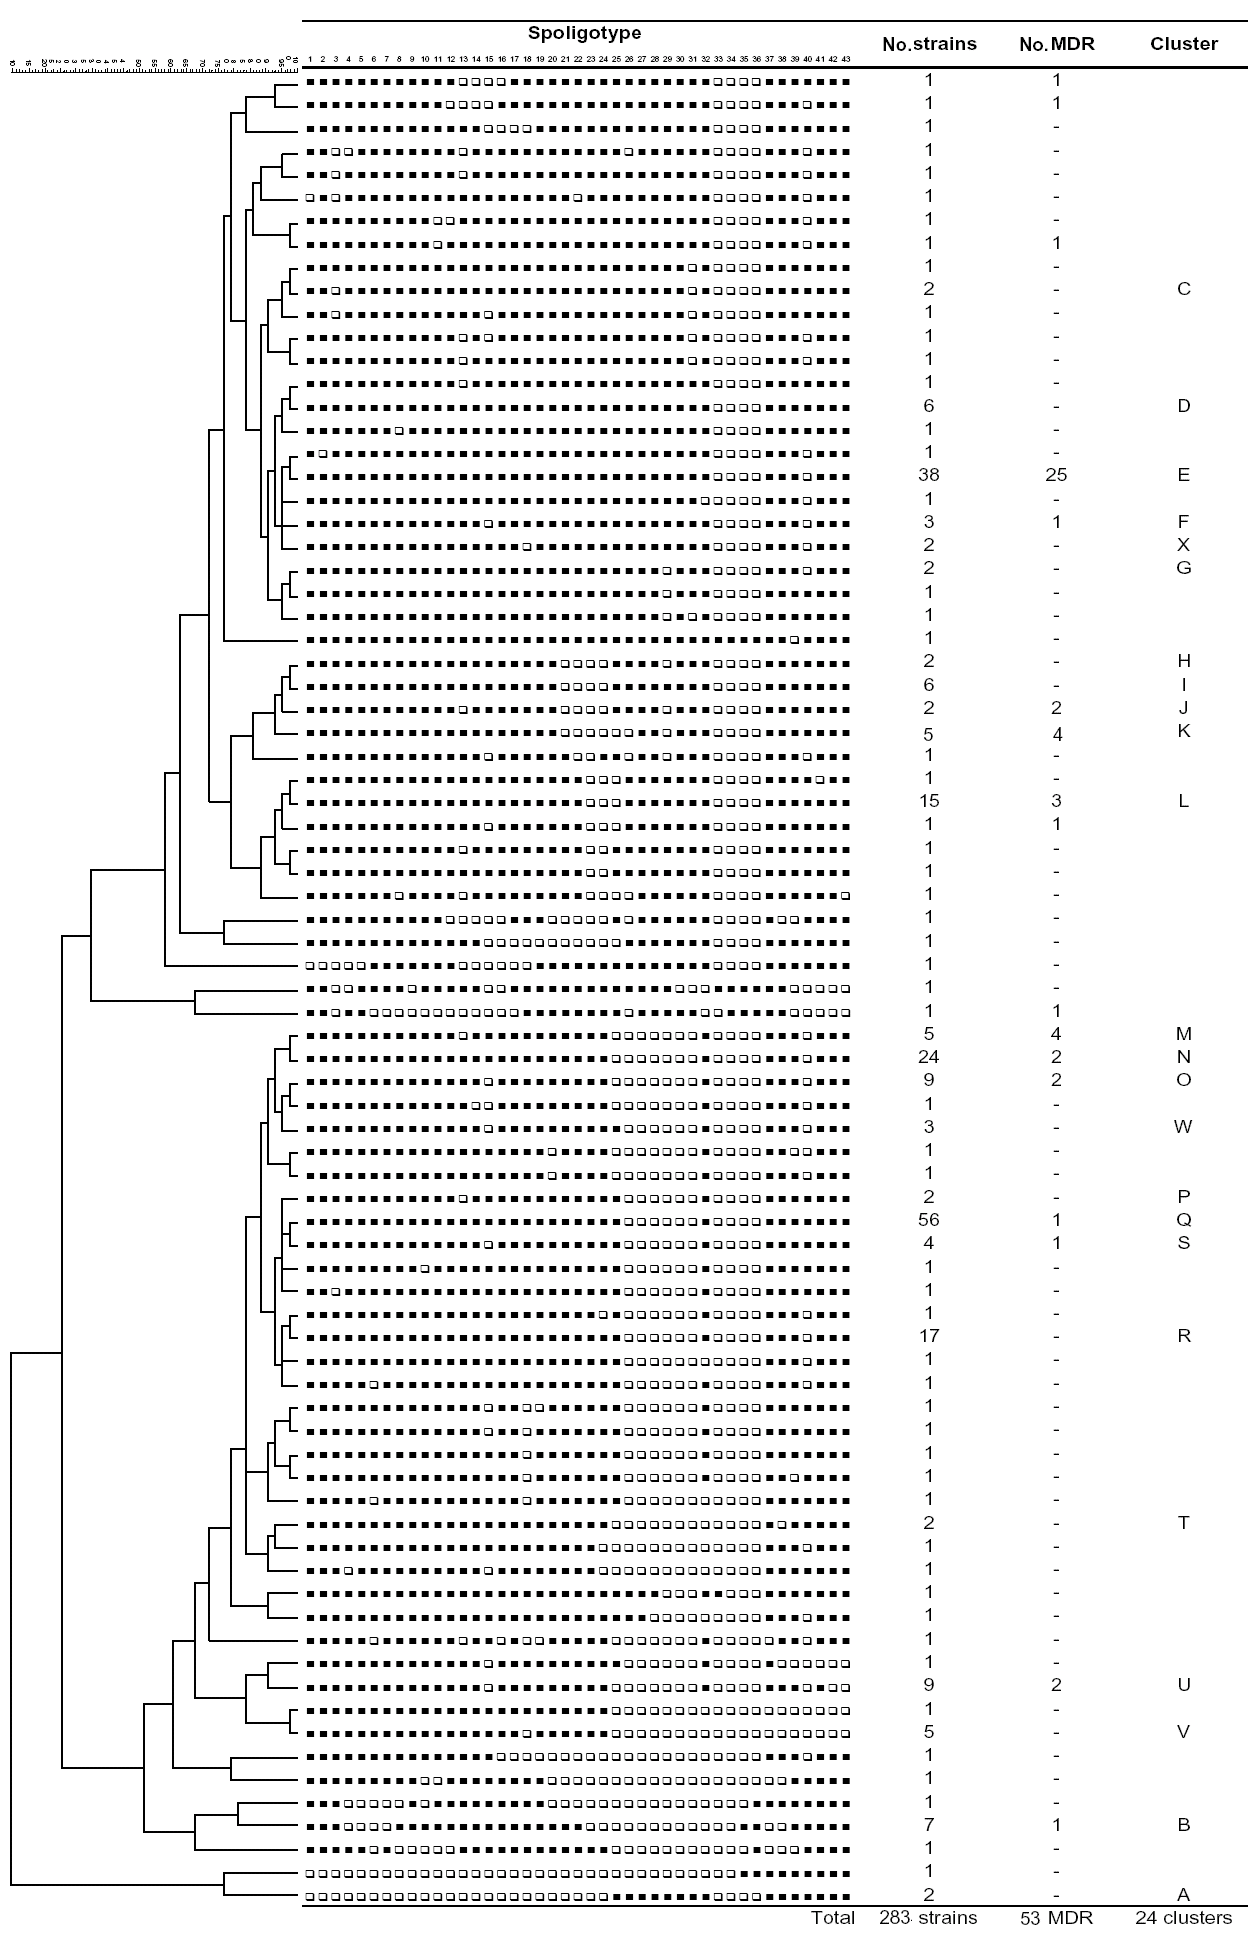 Dendrogram of patterns of the 283 strains spoligotyped (53 multidrug-resistant [MDR] and 230 non-MDR strains). For a printer friendly version of Figure A1, available at http://wwwnc.cdc.gov/eid/pdfs/06-0361-FA1.pdf.